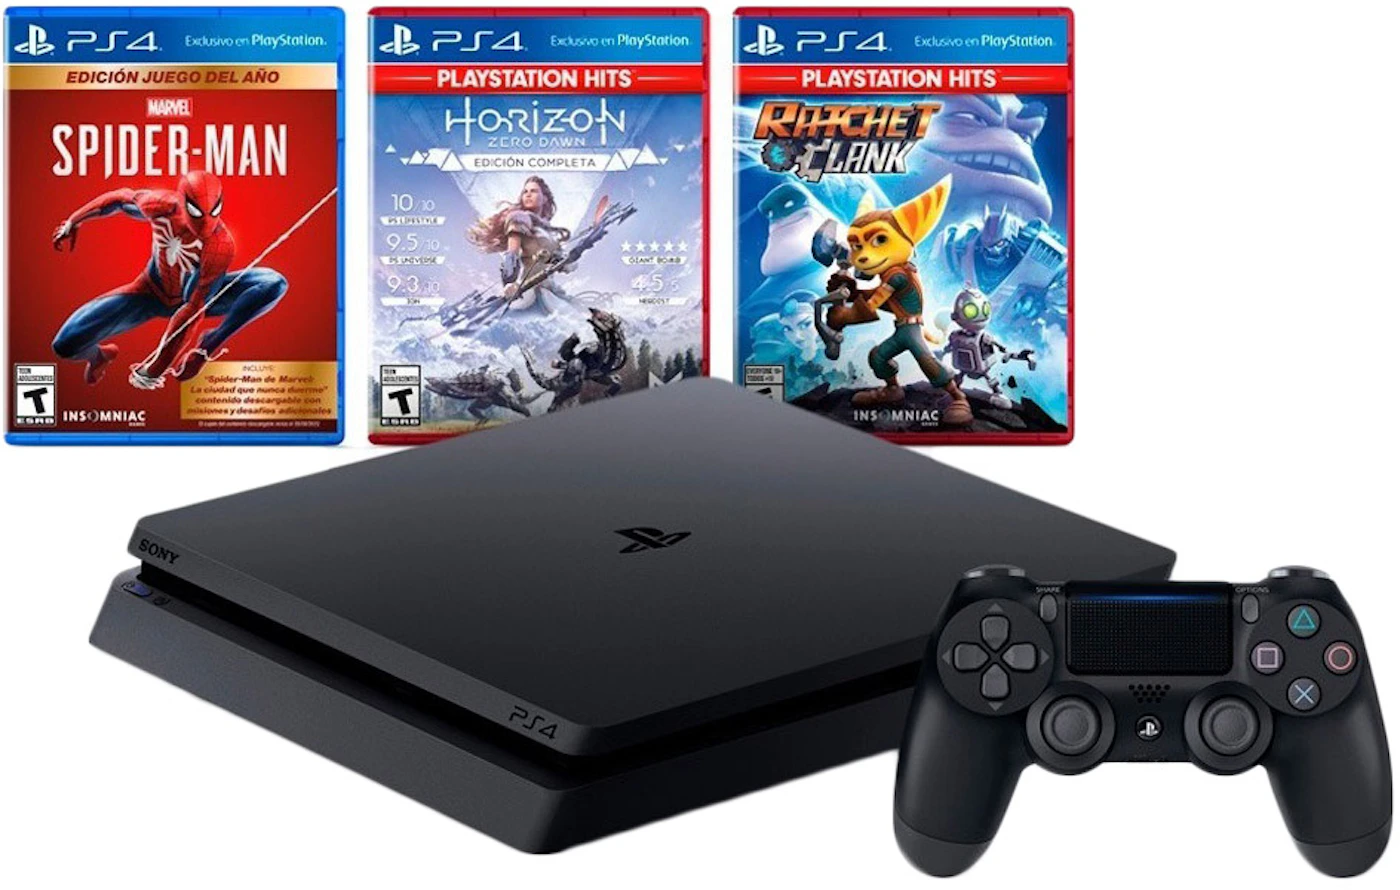 Sony Playstation 4 PS4 Slim 1TB (3 Game Bundle: Spiderman 3, Horizon Zero  Down, Ratchet and Clank) Console CUH-2115B - ES